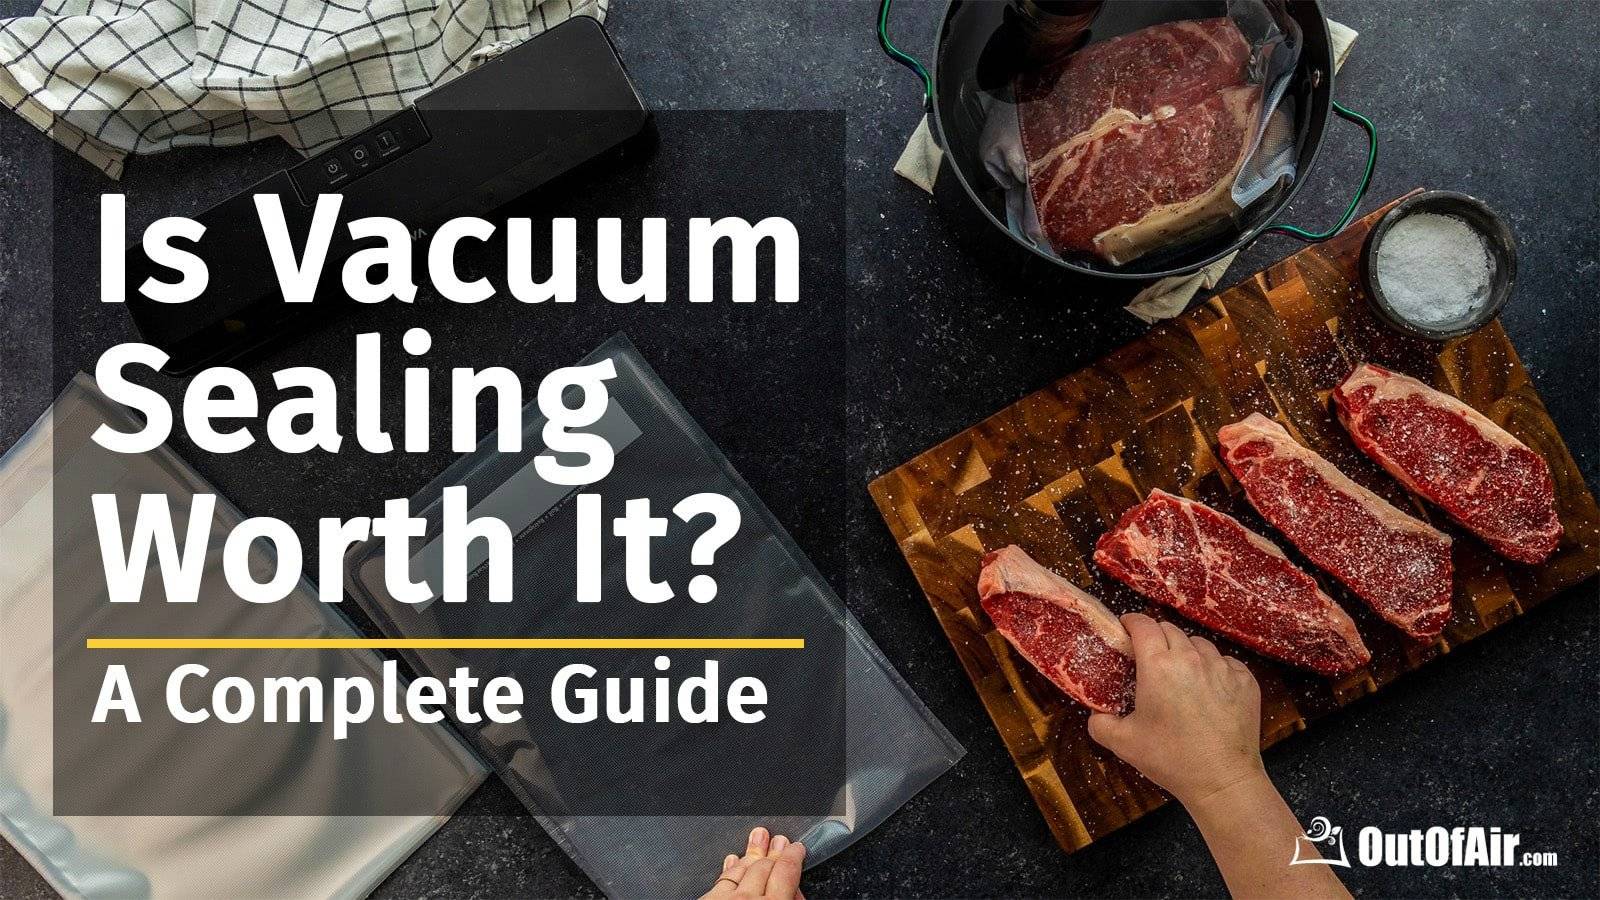 Is Vacuum Sealing Worth It? A Complete Guide